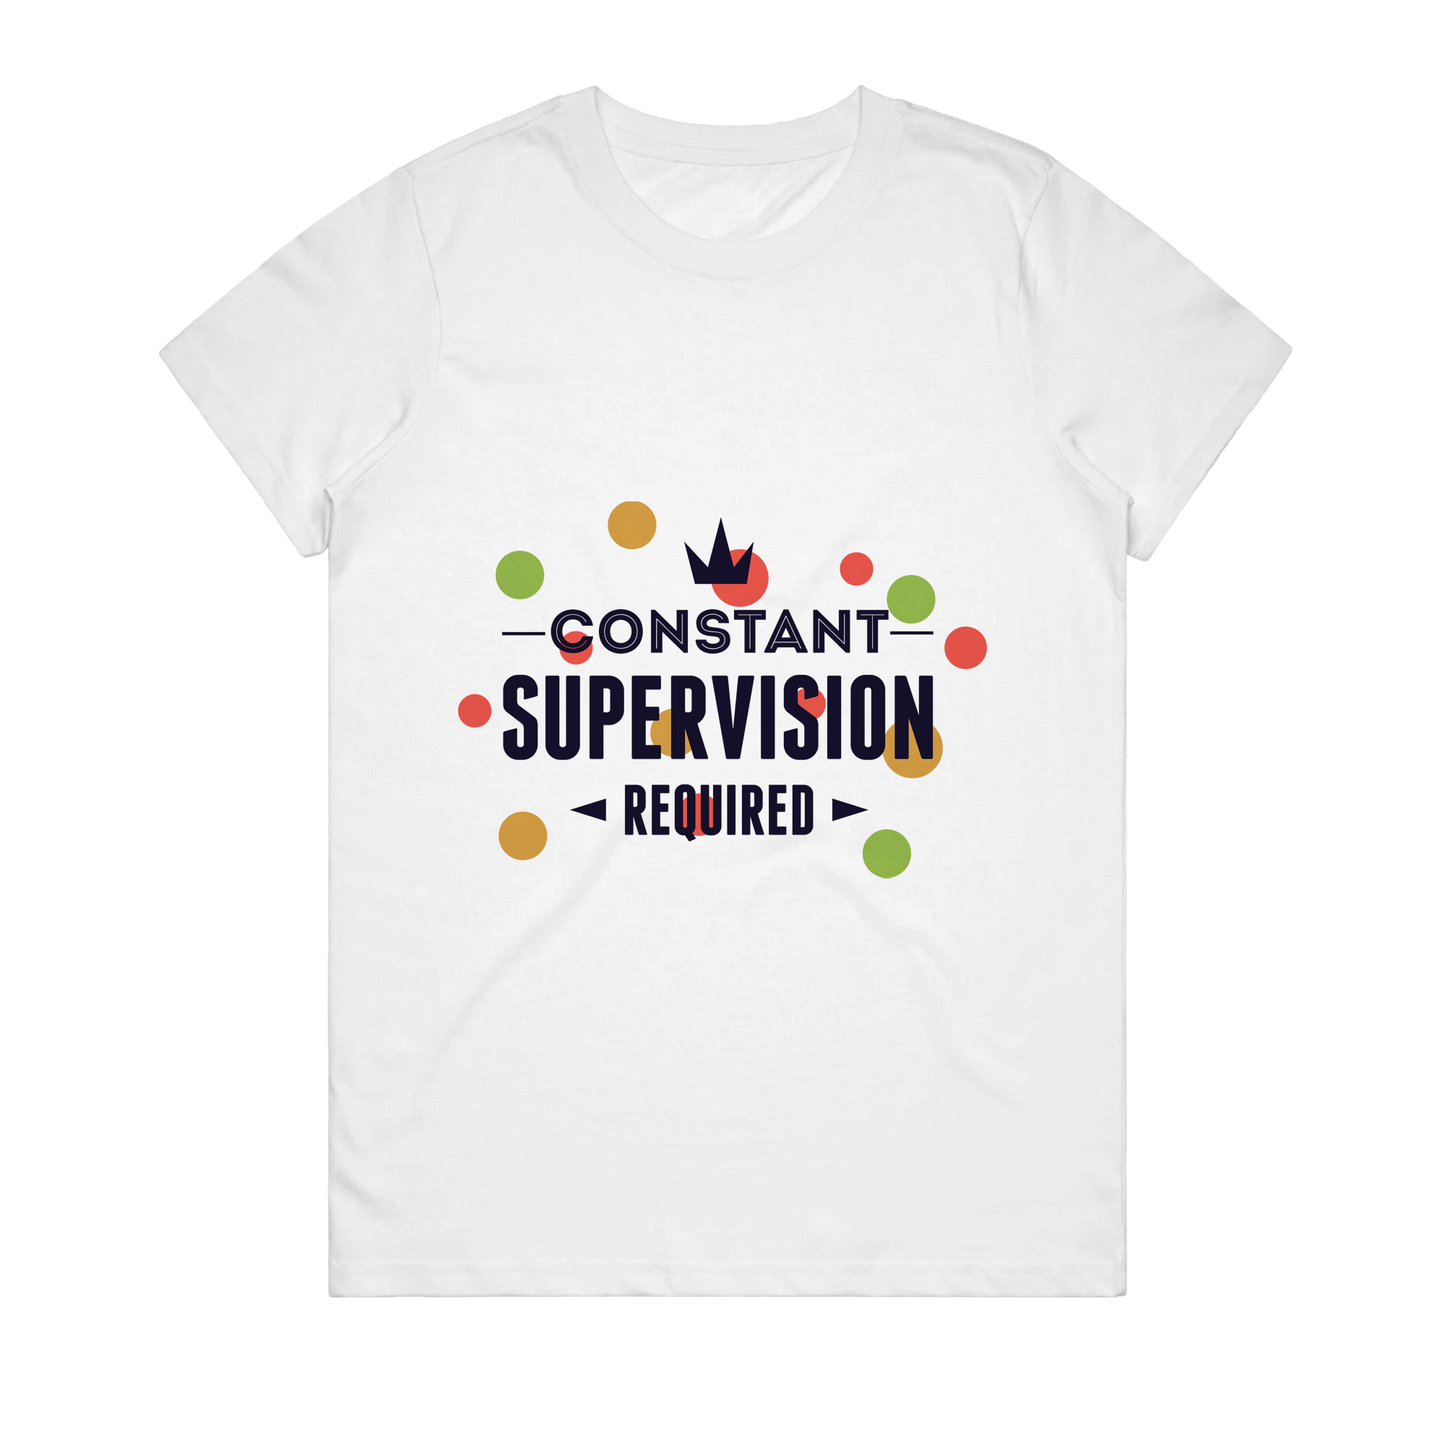 Women's T-Shirt - Constant Supervision Required